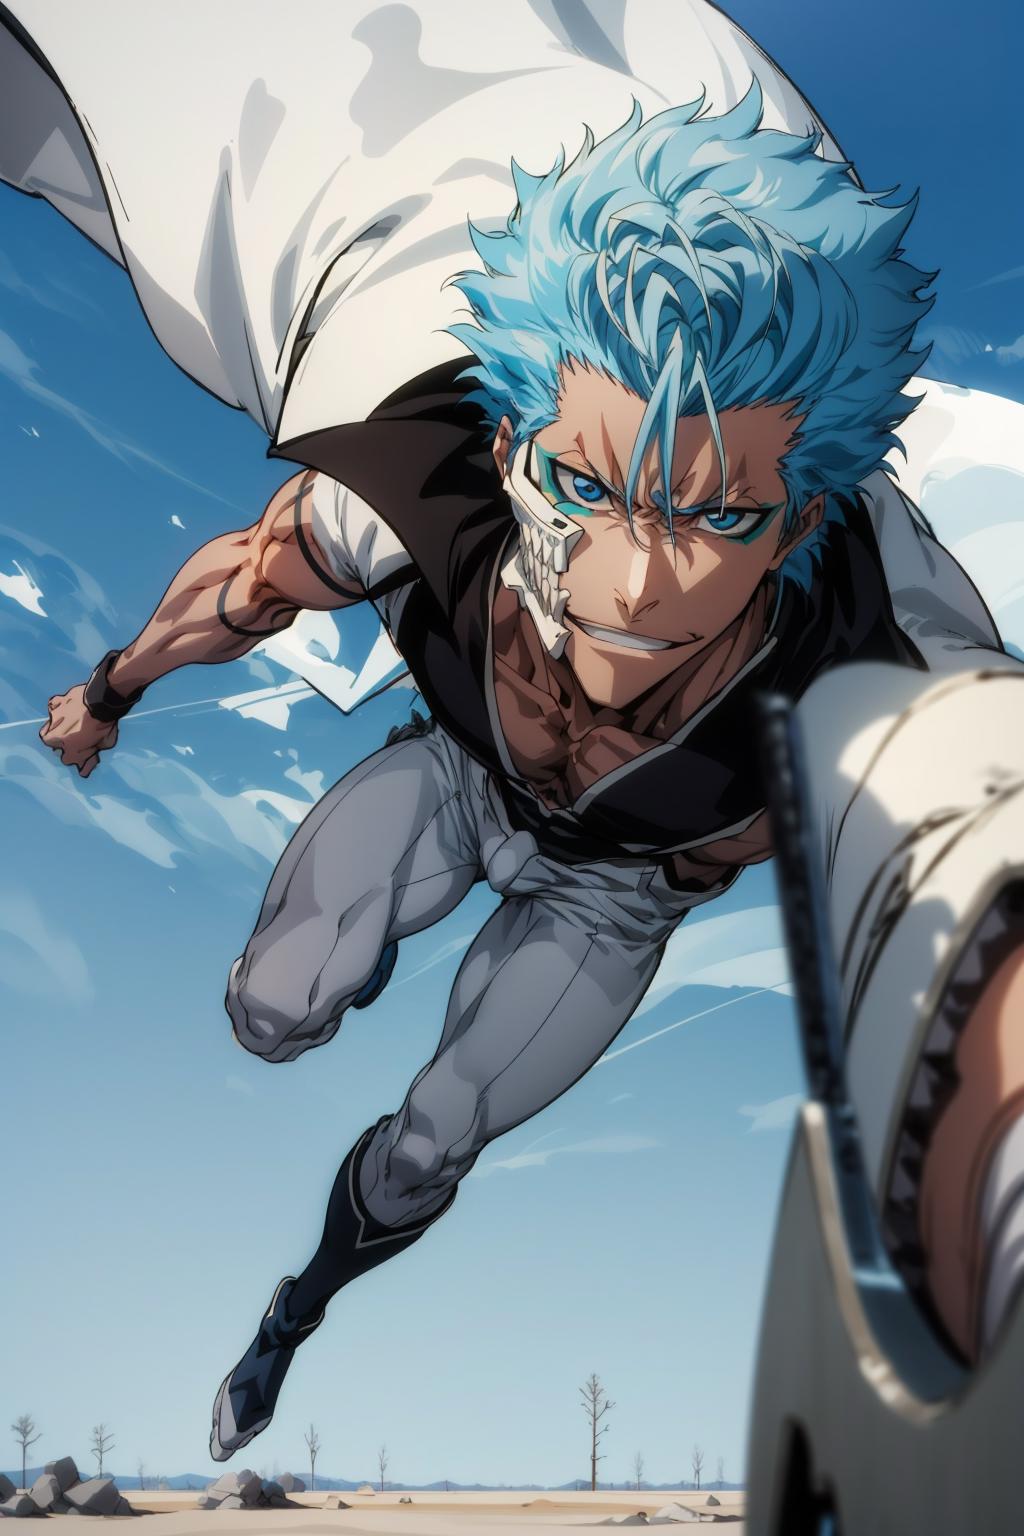 A blue-haired anime character flying through the air with a sword in his hand.